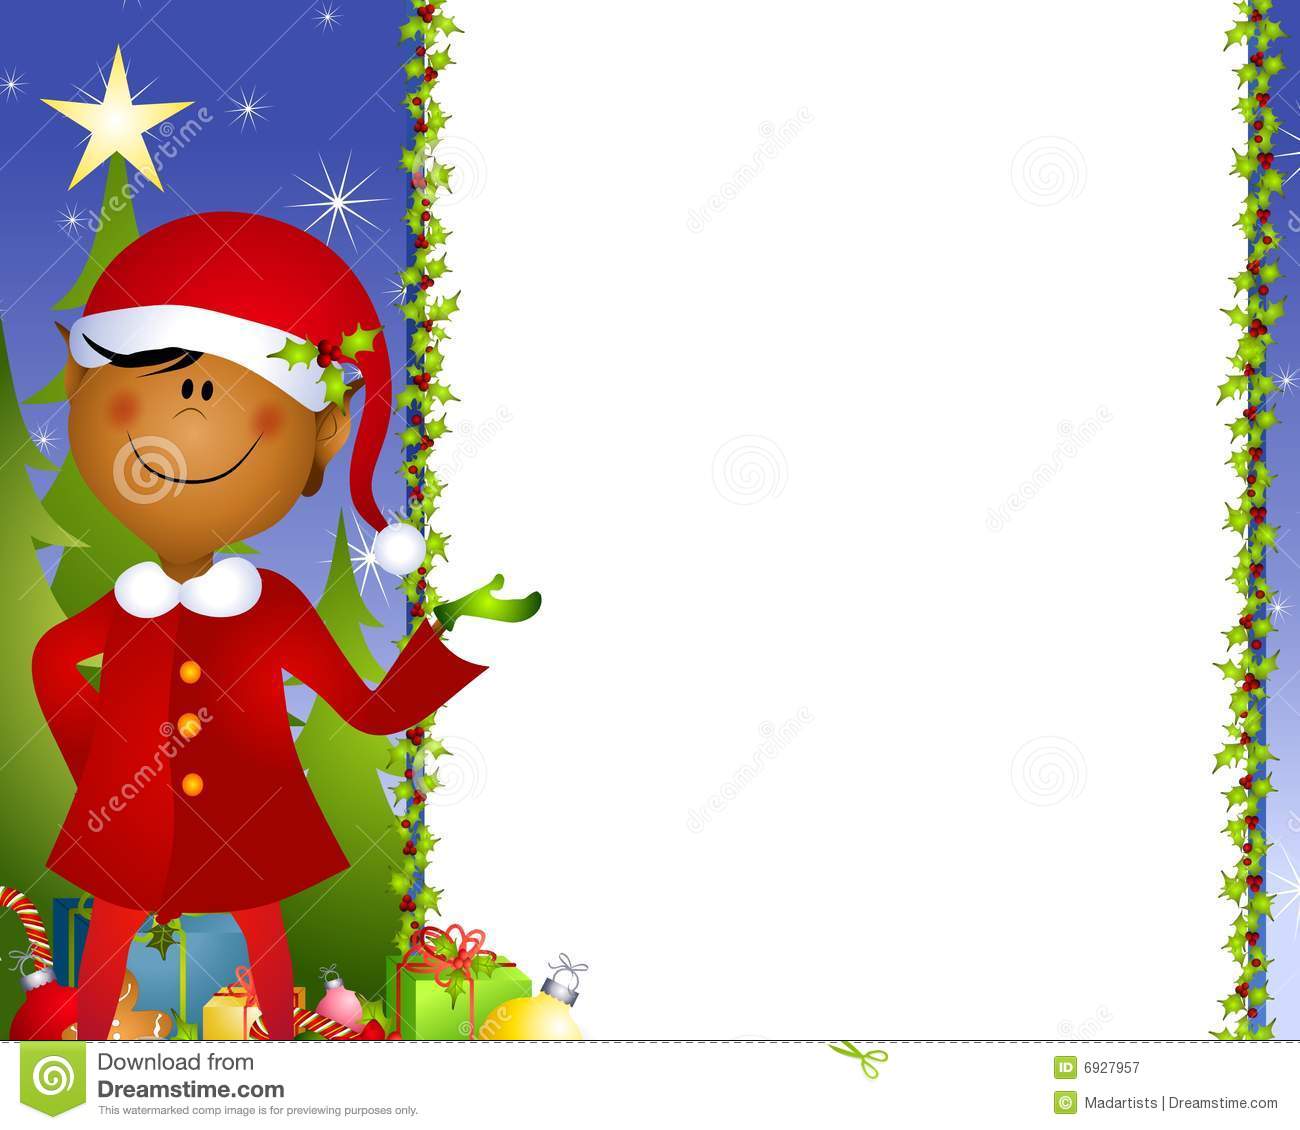 Christmas Background Clipart.